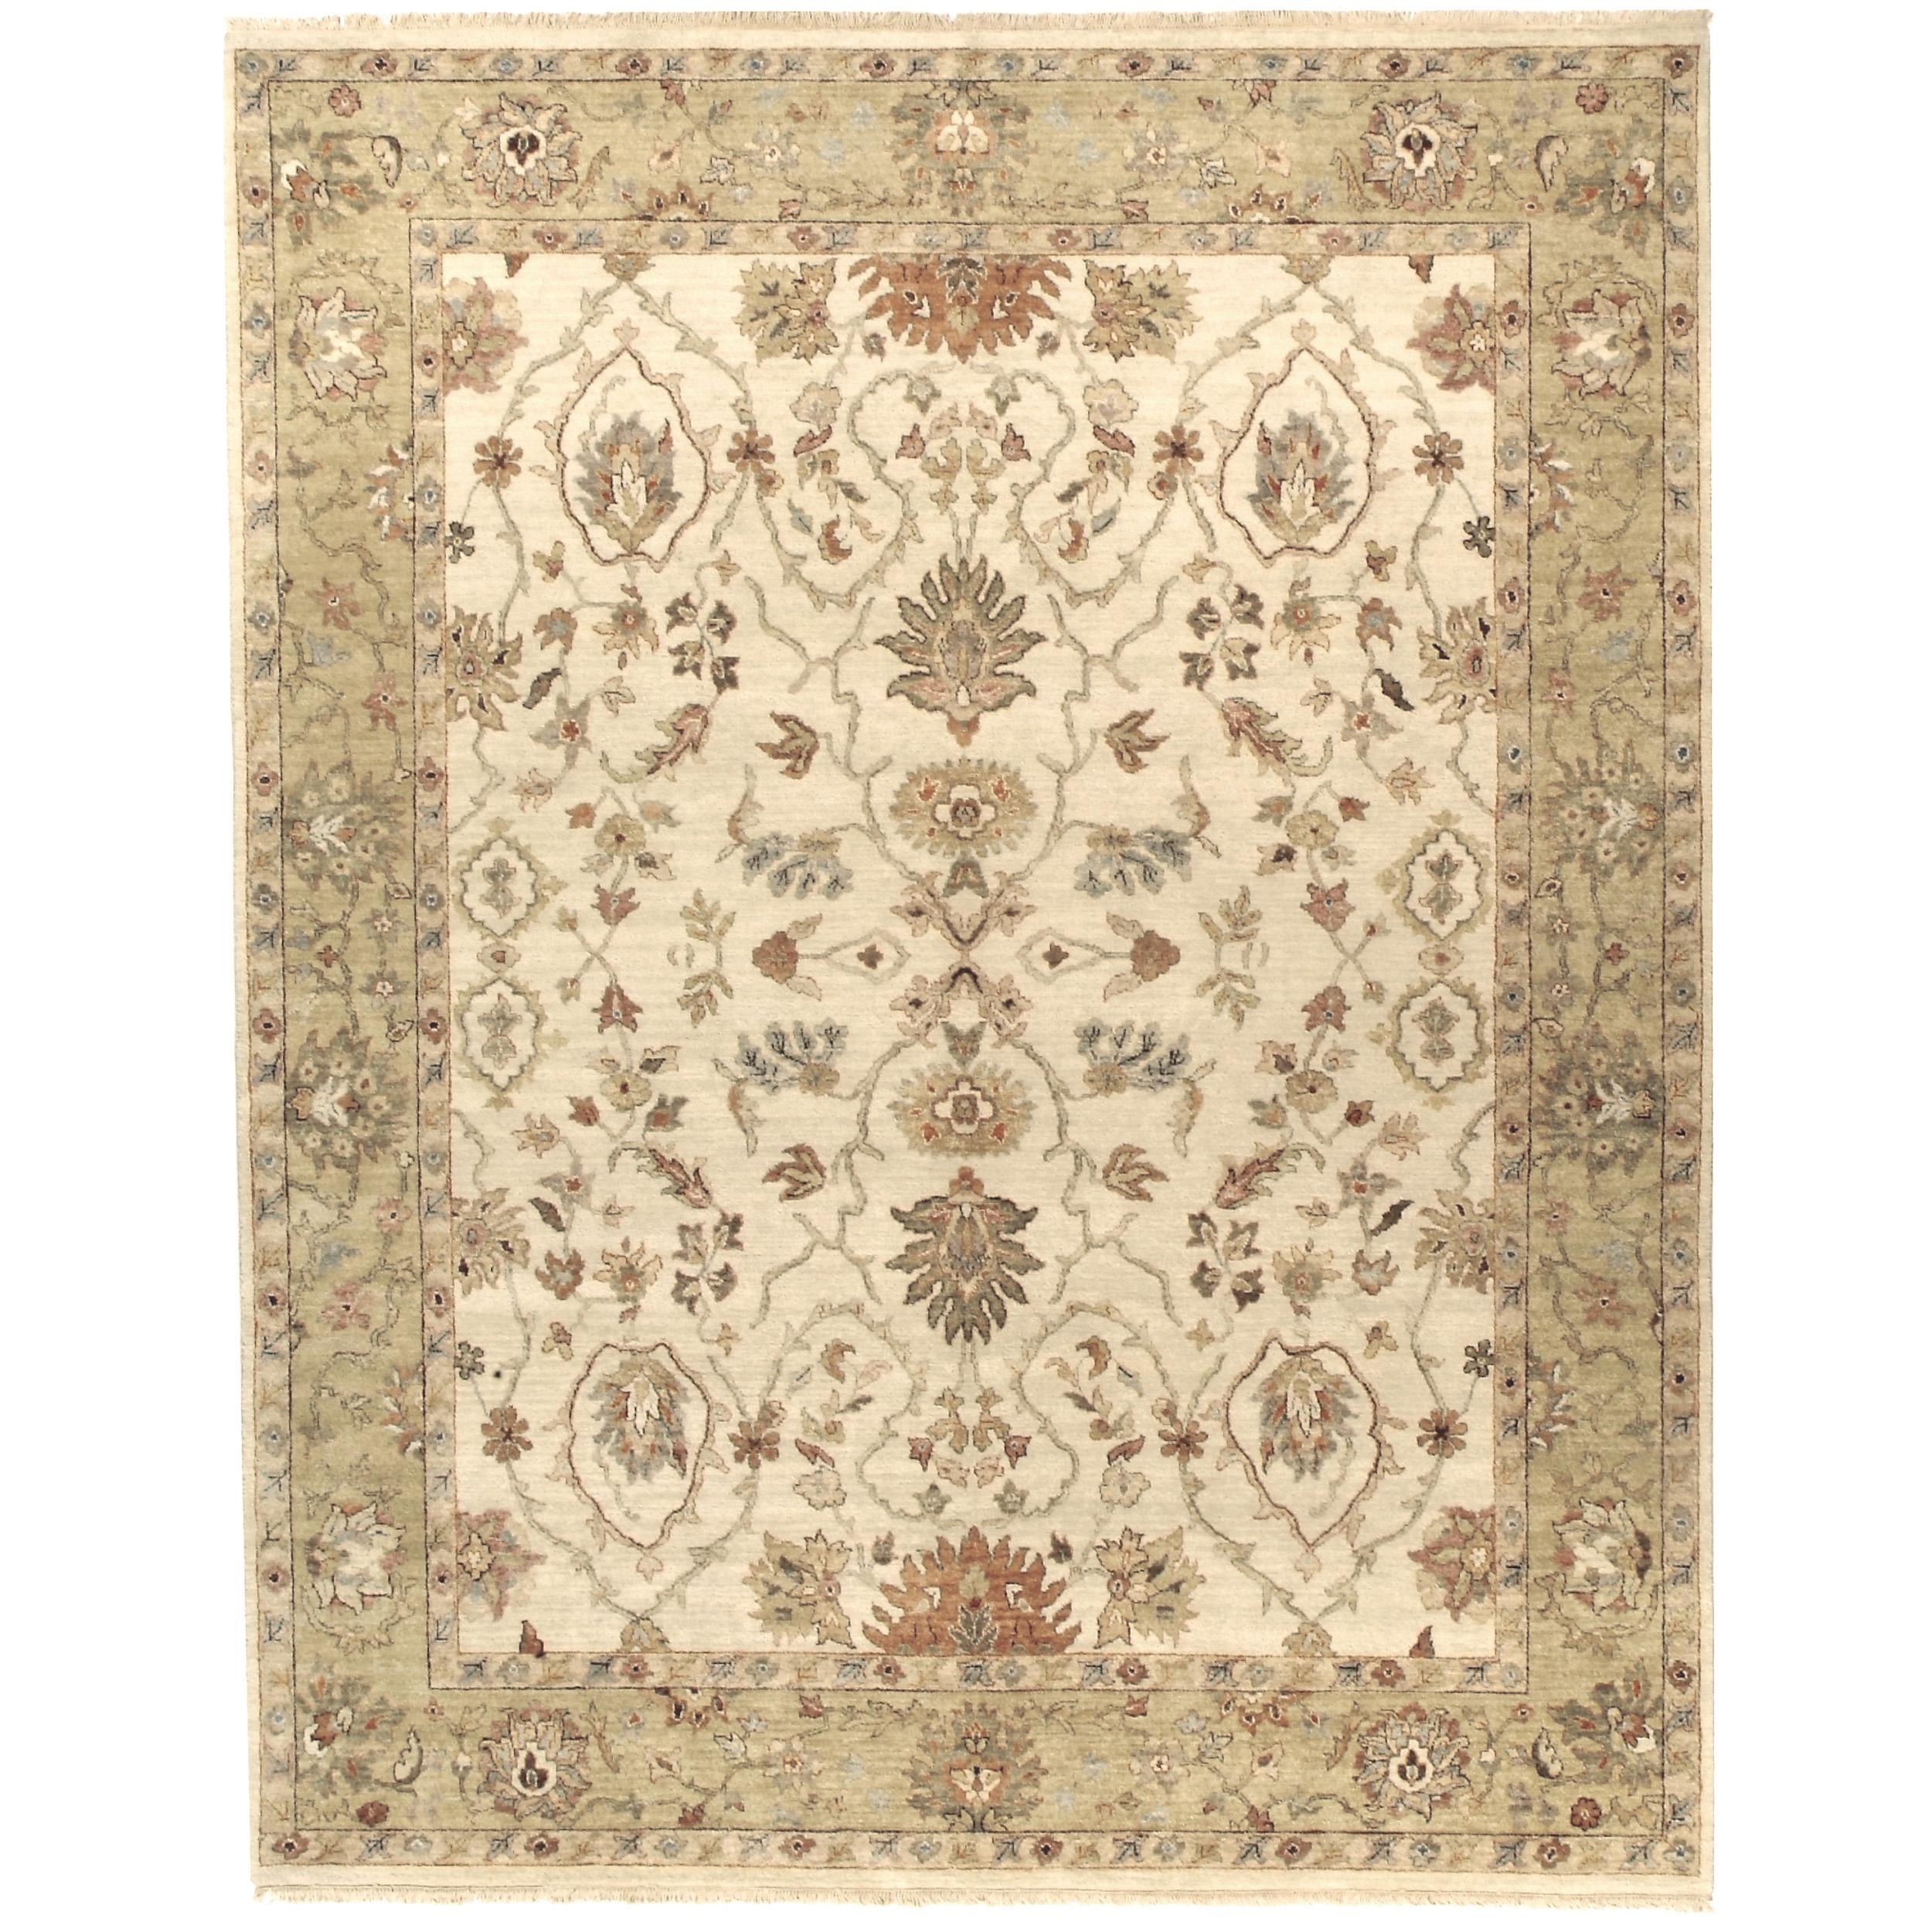 Luxury Traditional Hand-Knotted Cream/Gold 14x28 Rug